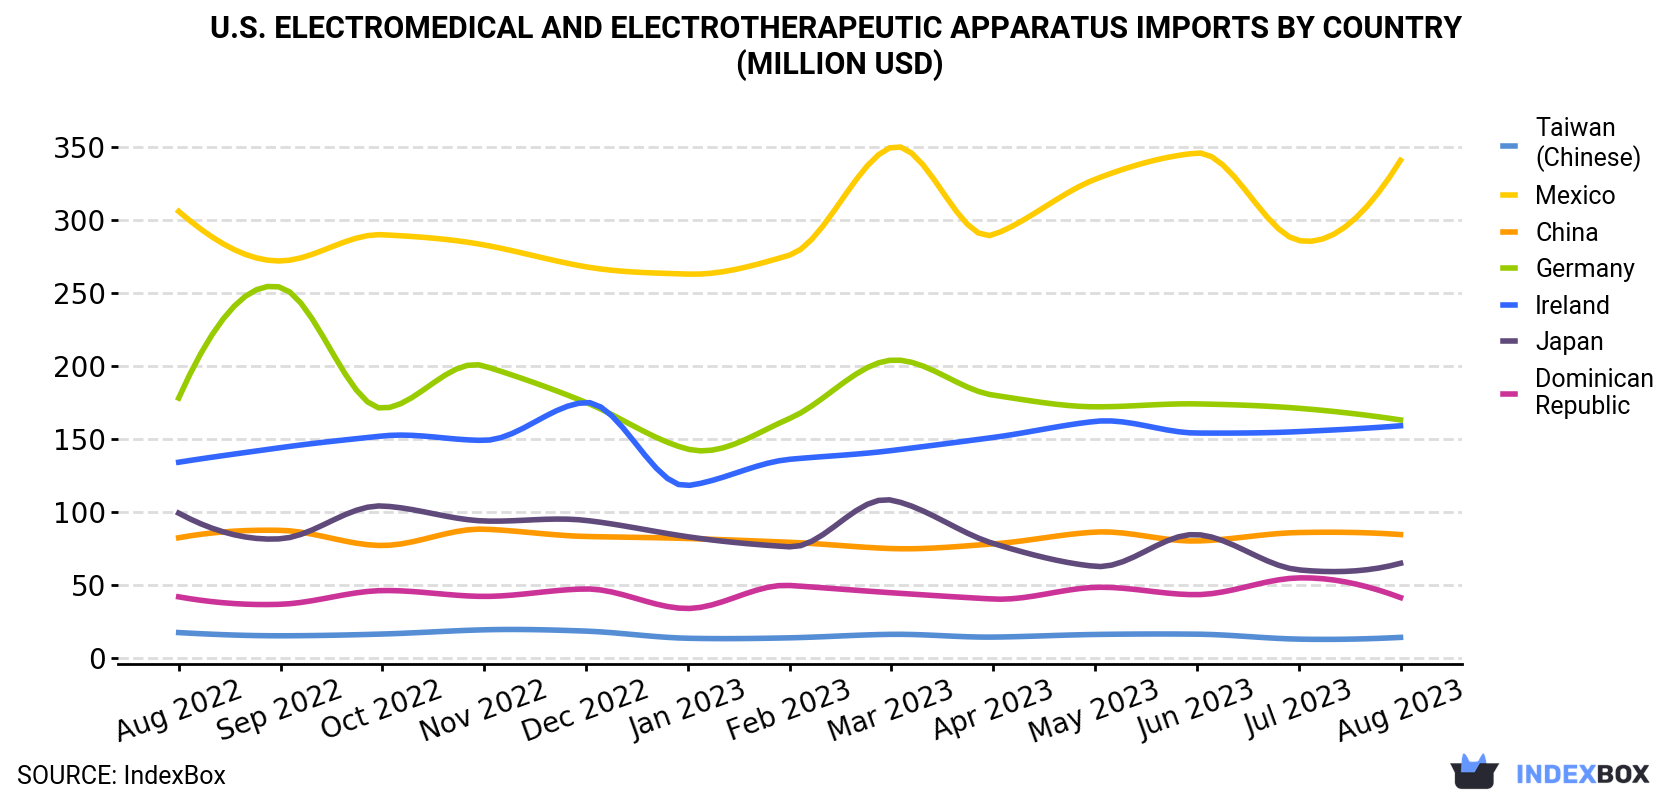 U.S. Electromedical And Electrotherapeutic Apparatus Imports By Country (Million USD)